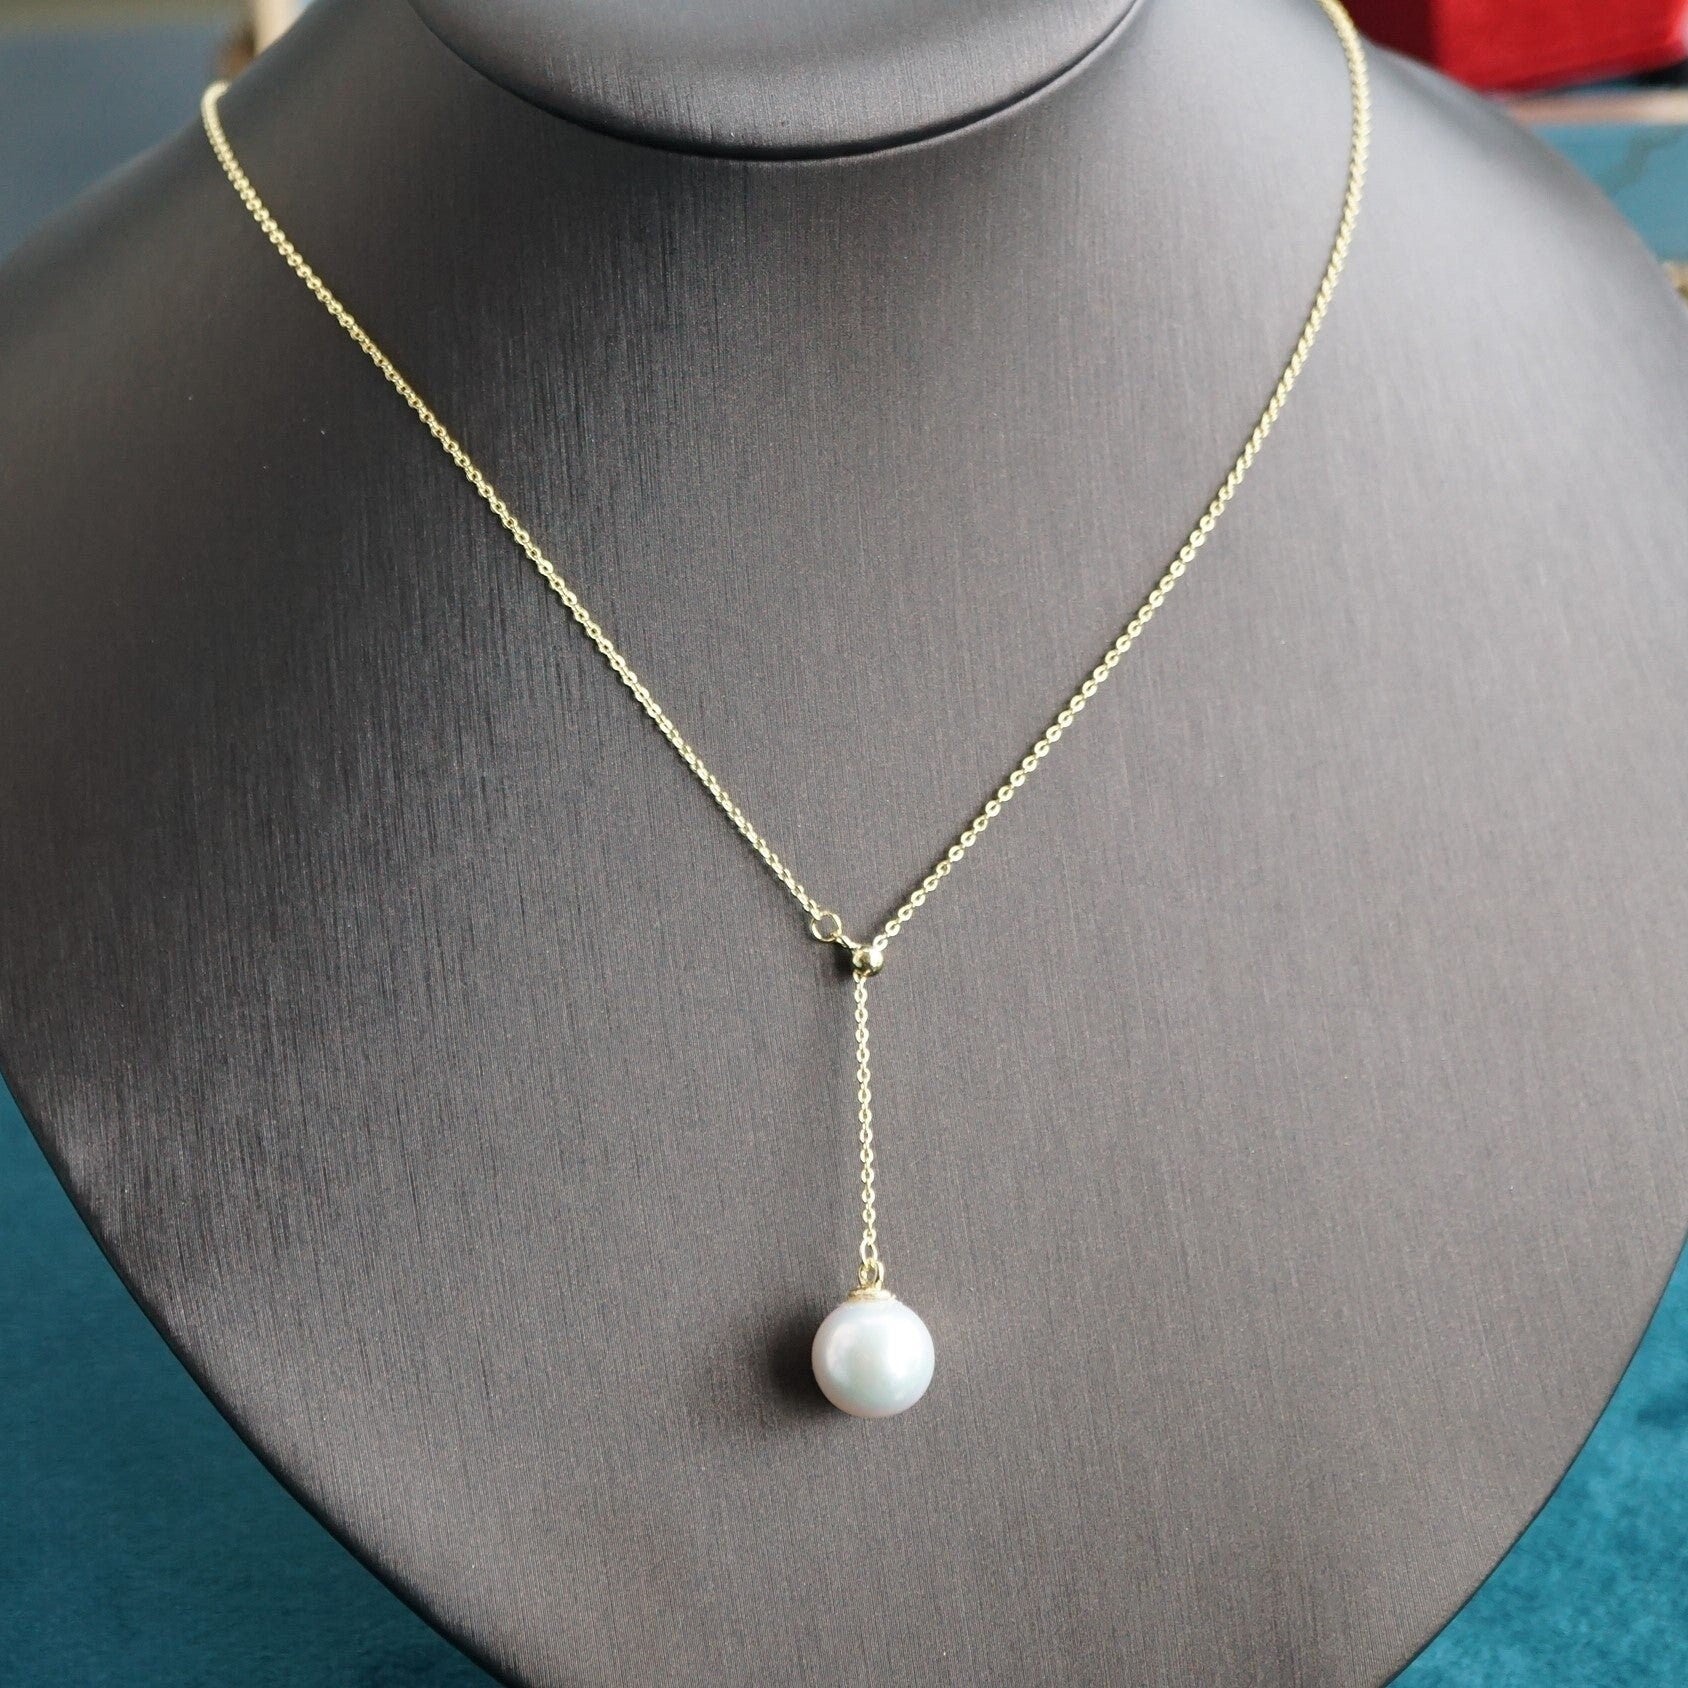 Adjustable Freshwater Pearl Pendant Necklace